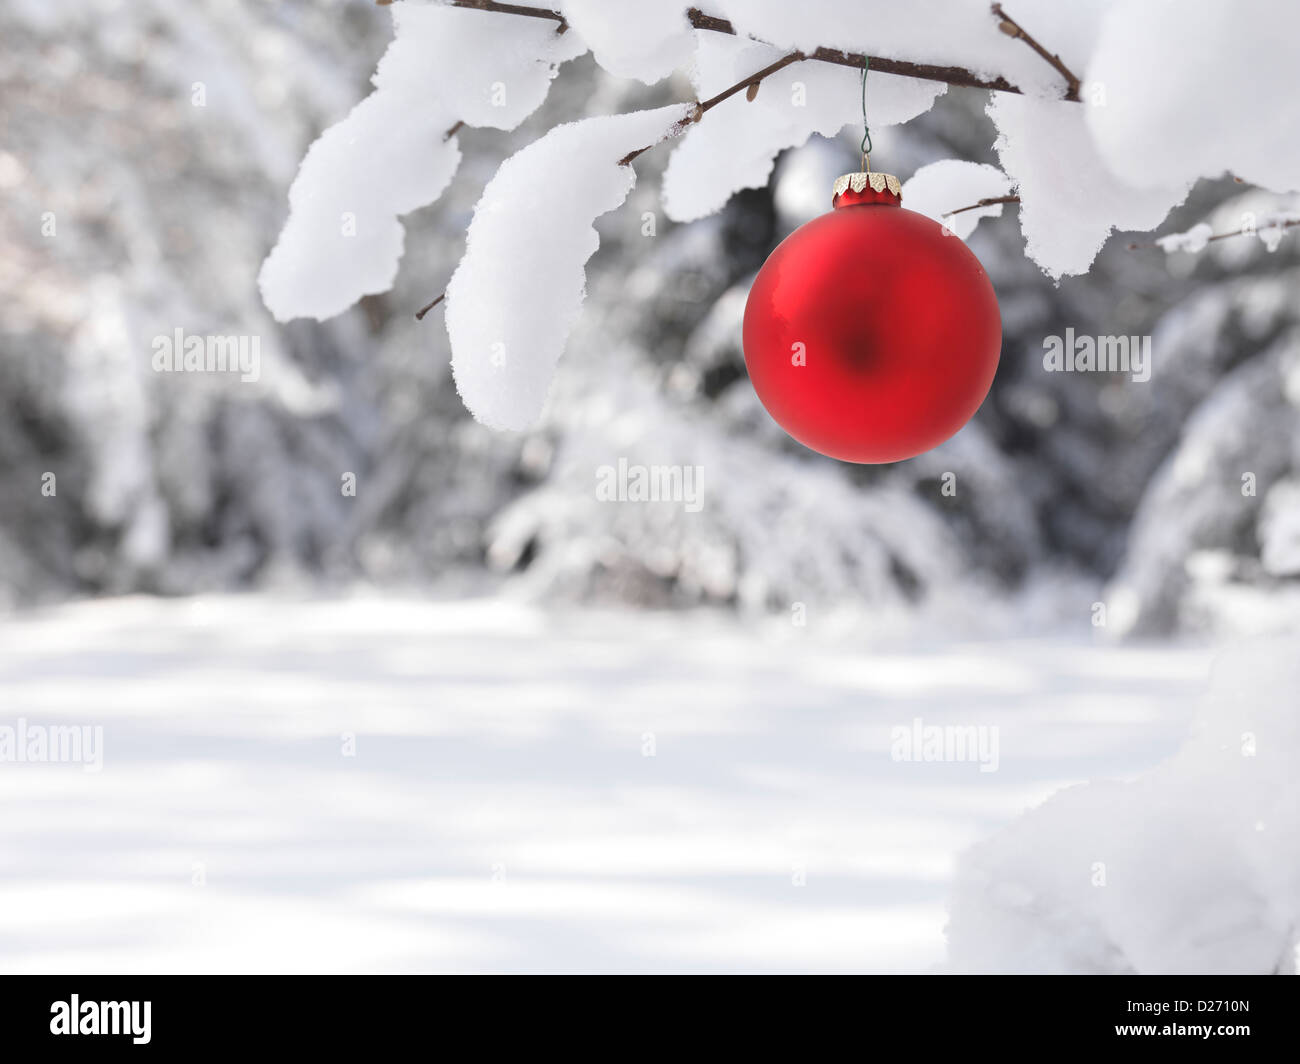 Red Christmas ornament outdoors on a snow covered tree closeup artistic holiday background winter nature scenic Stock Photo